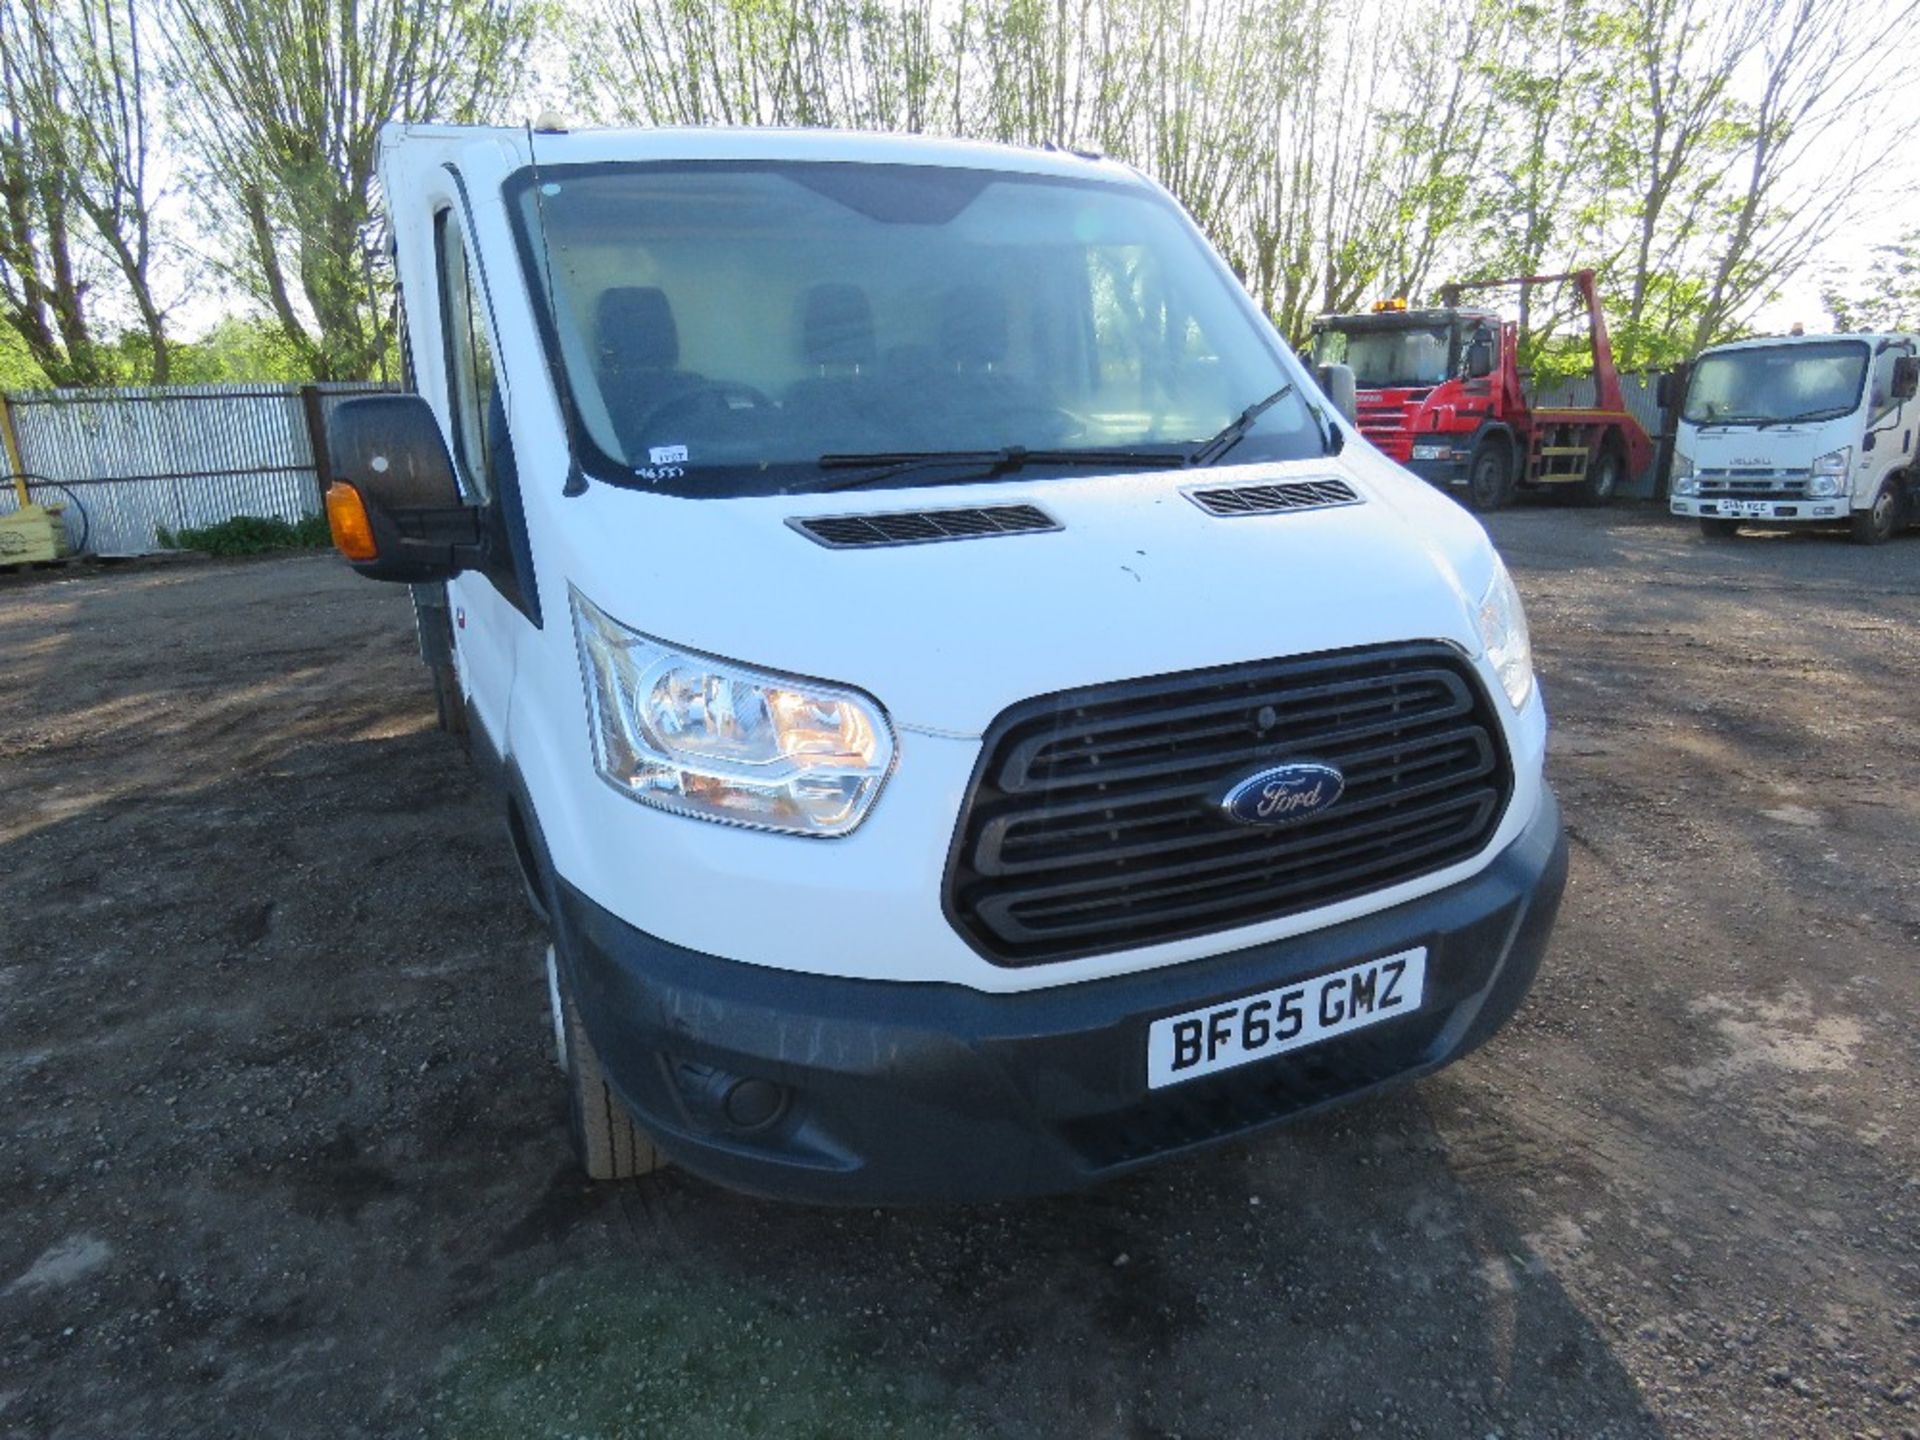 FORD TRANSIT TIPPER TRUCK WITH TOOL STORAGE LOCKER REG:BF65 GMZ. WITH V5 AND MOT UNTIL15.04.25. FIRS - Image 2 of 17